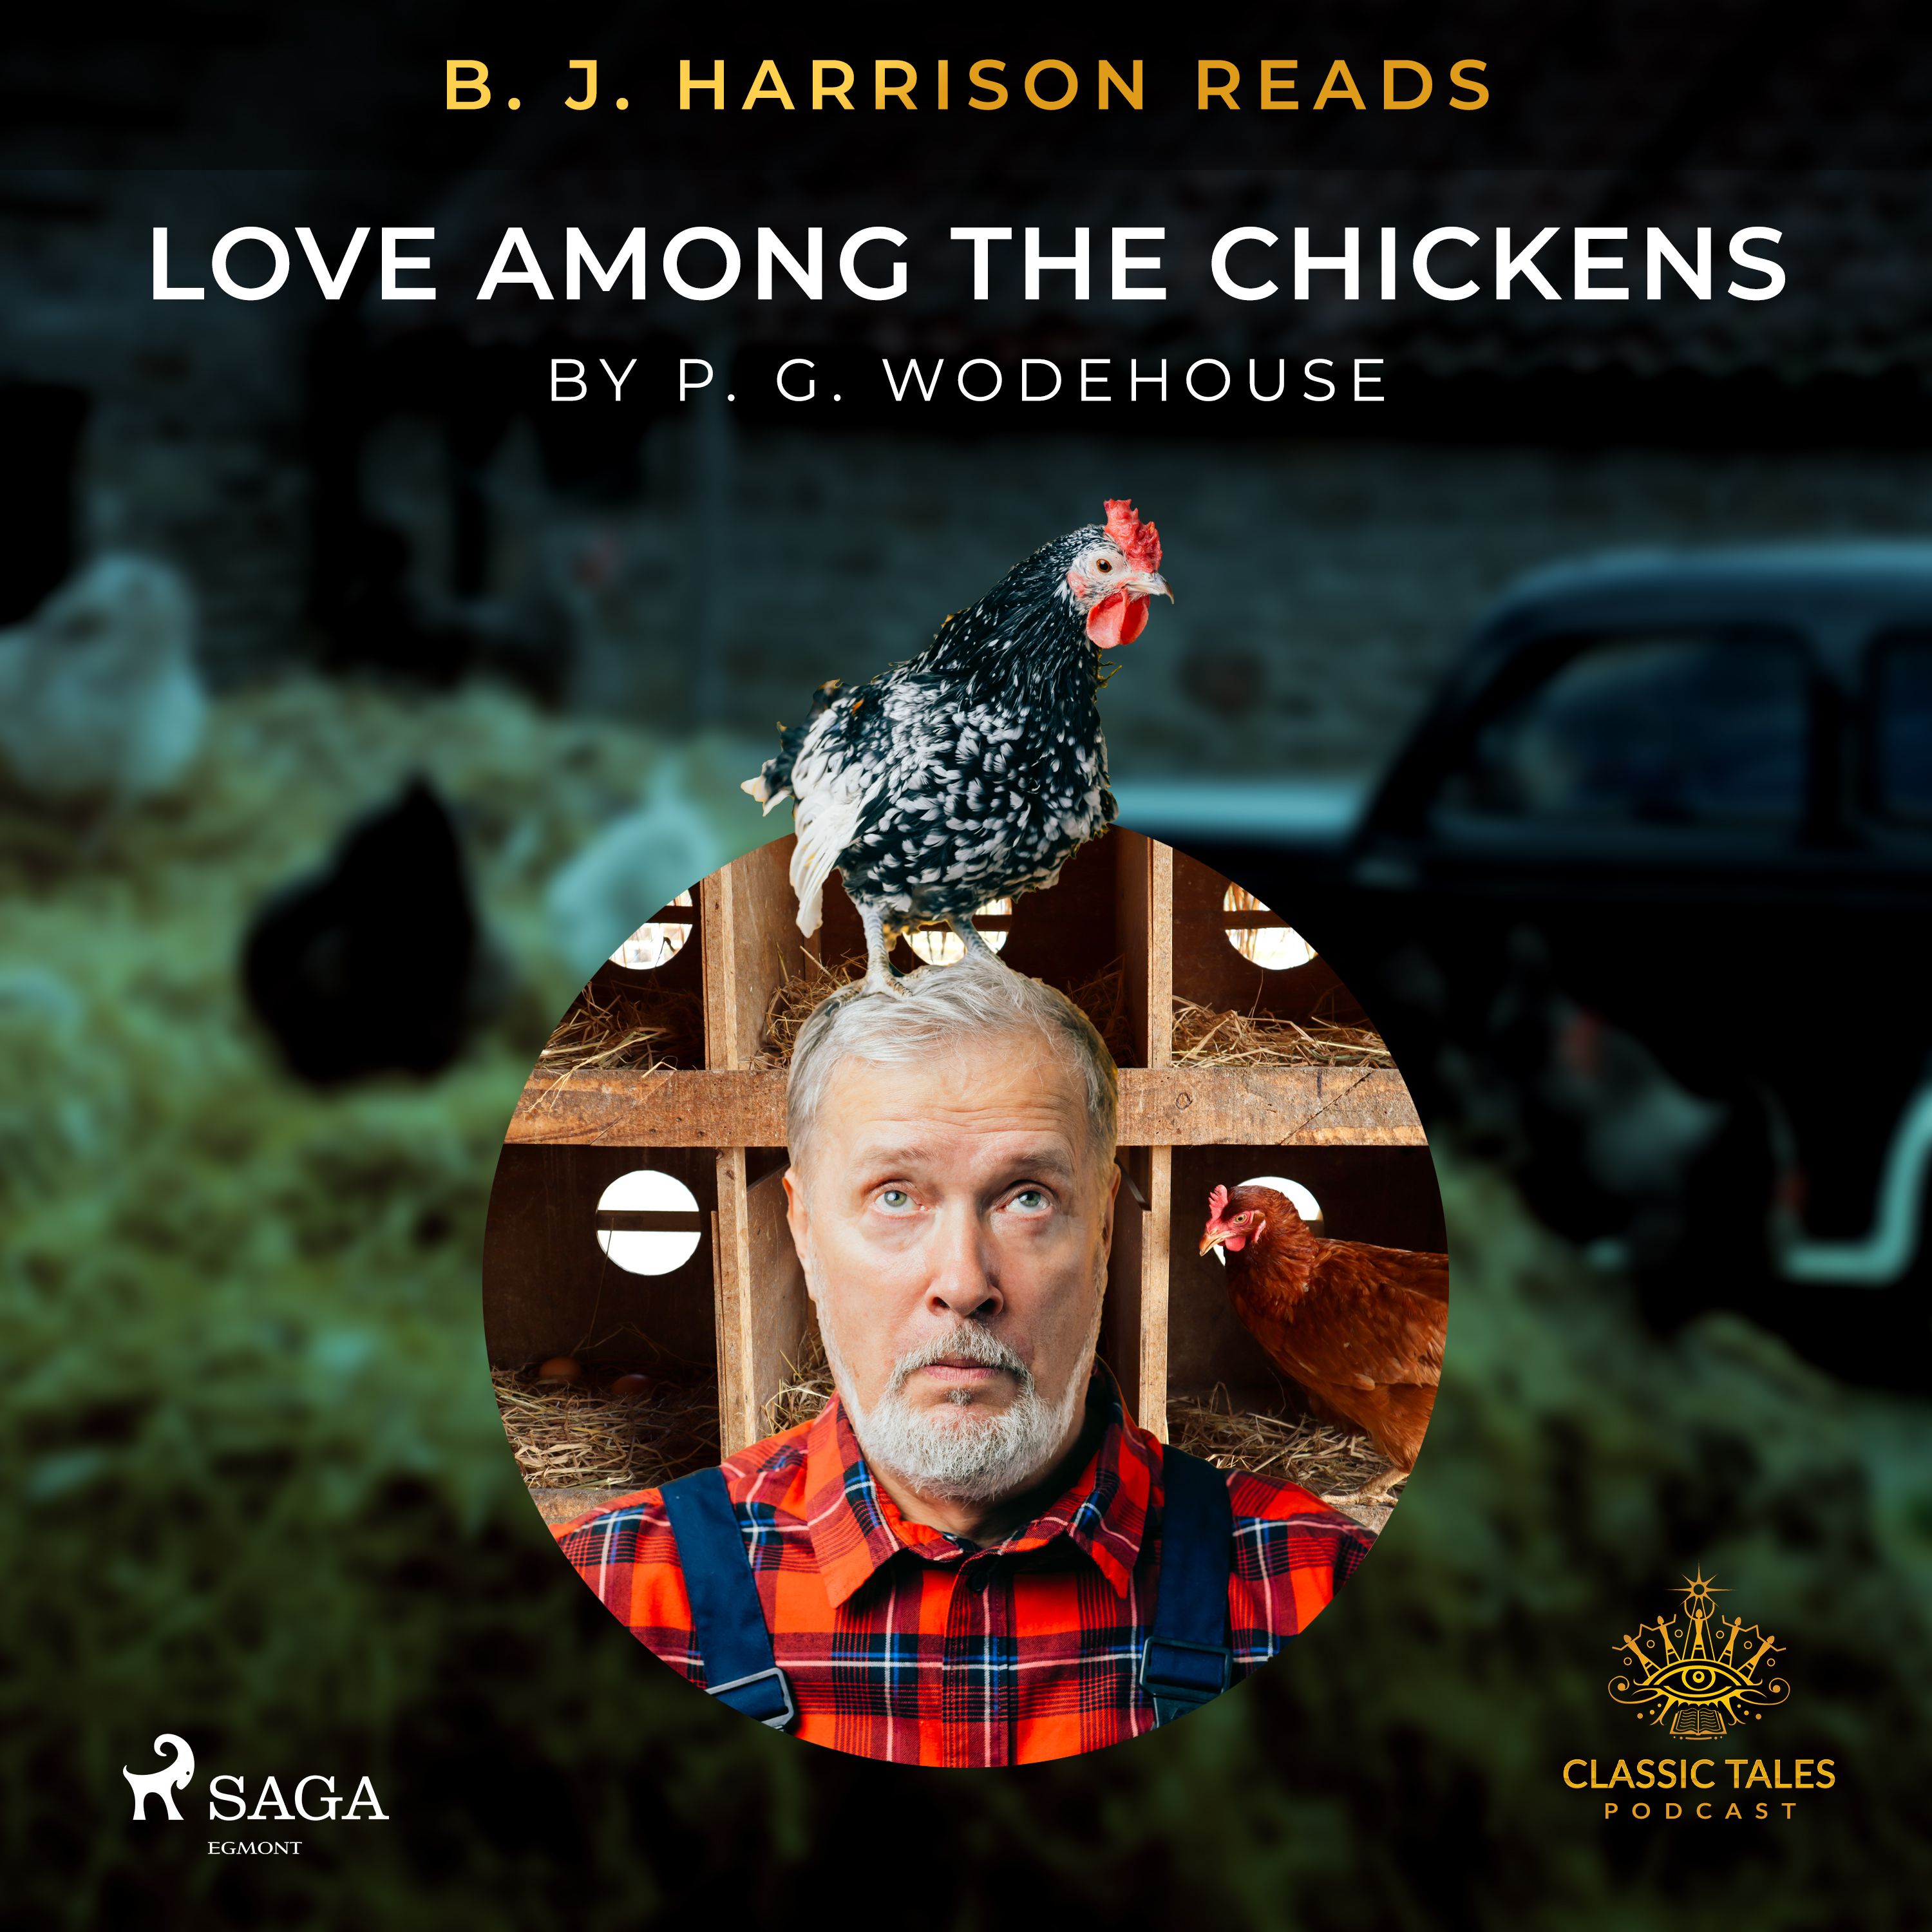 B. J. Harrison Reads Love Among the Chickens, lydbog af P.G. Wodehouse